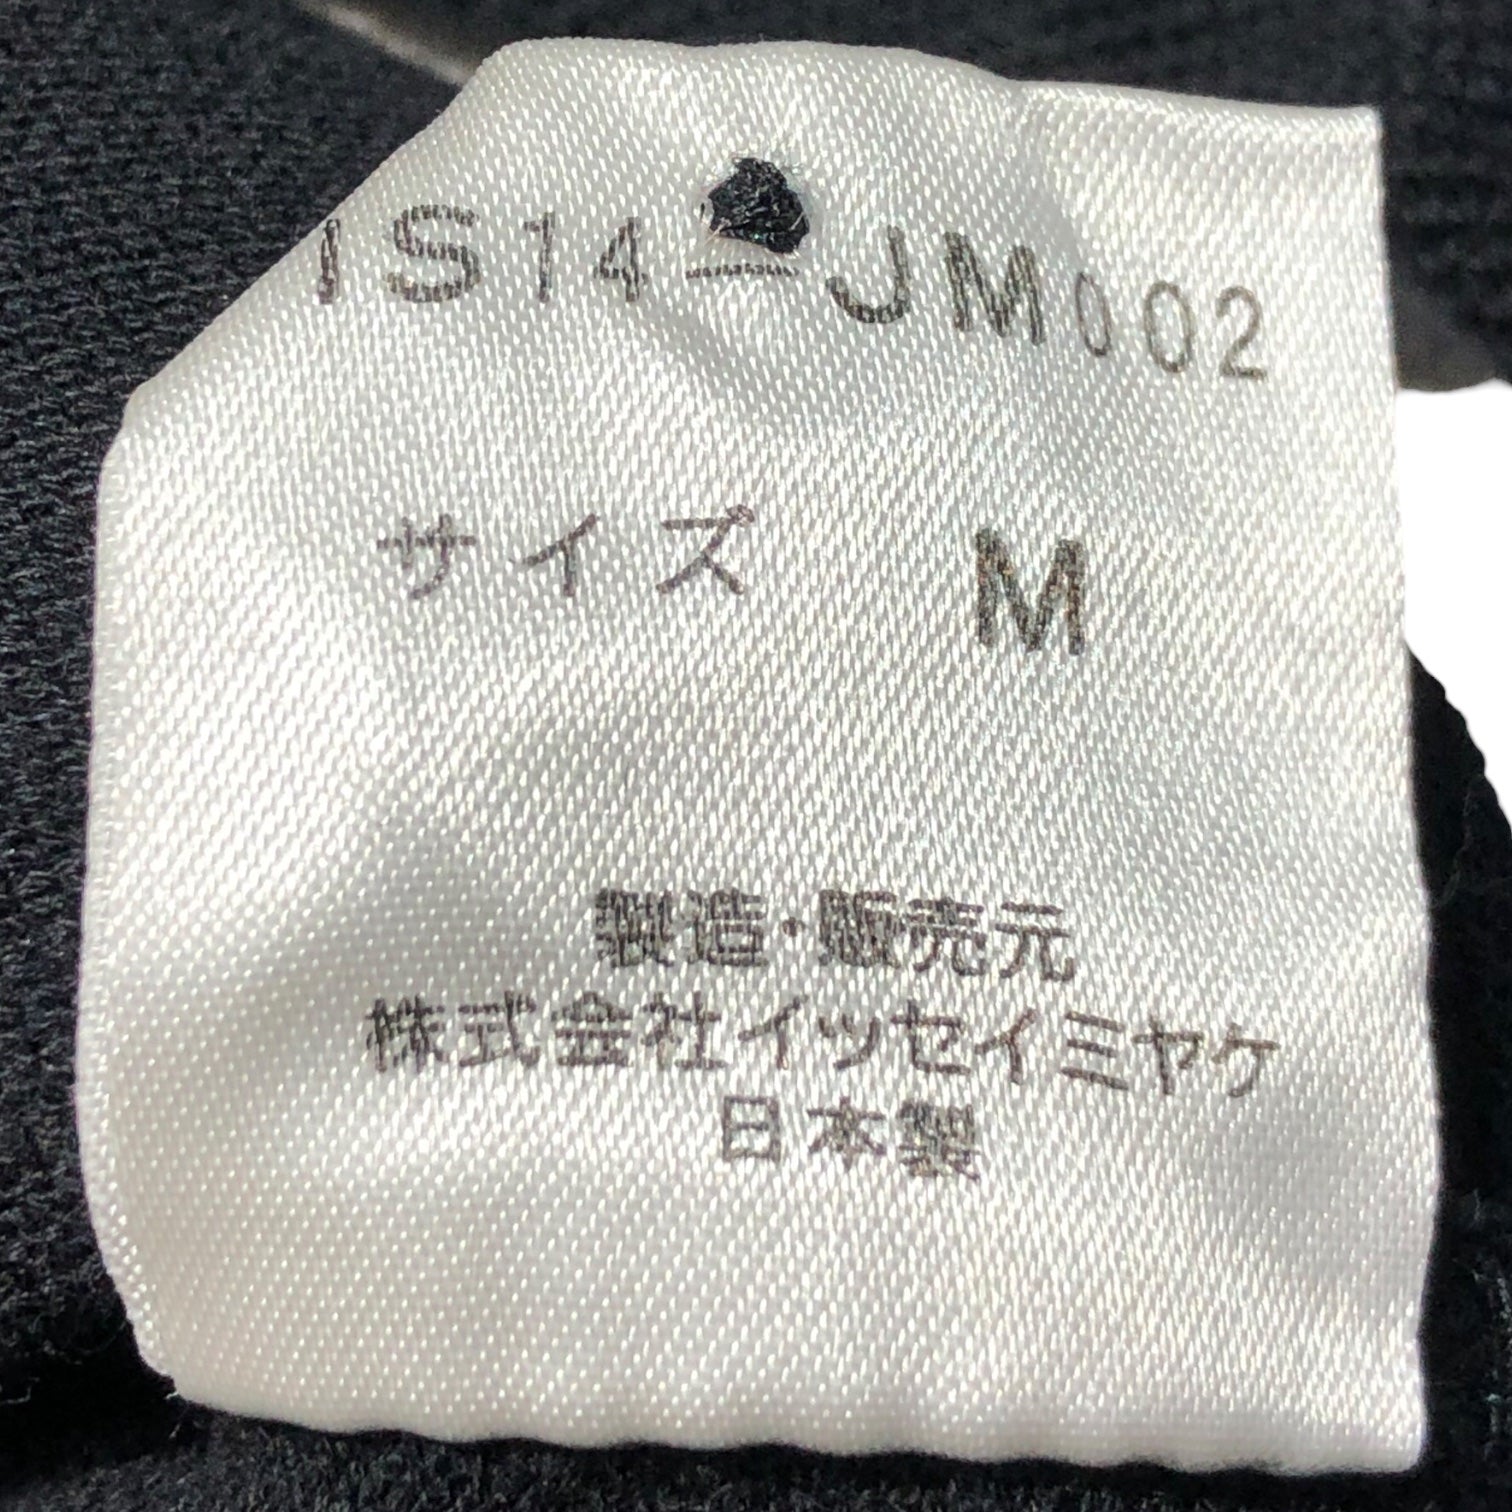 i.s. ISSEY MIYAKE(アイエス イッセイミヤケ) 90's ”I.S.COLLECTION”  Logo embroidery L/S polo shirt ロゴ 刺繍 長袖 ポロシャツ IS14-JM002 M ブラック アーカイブ